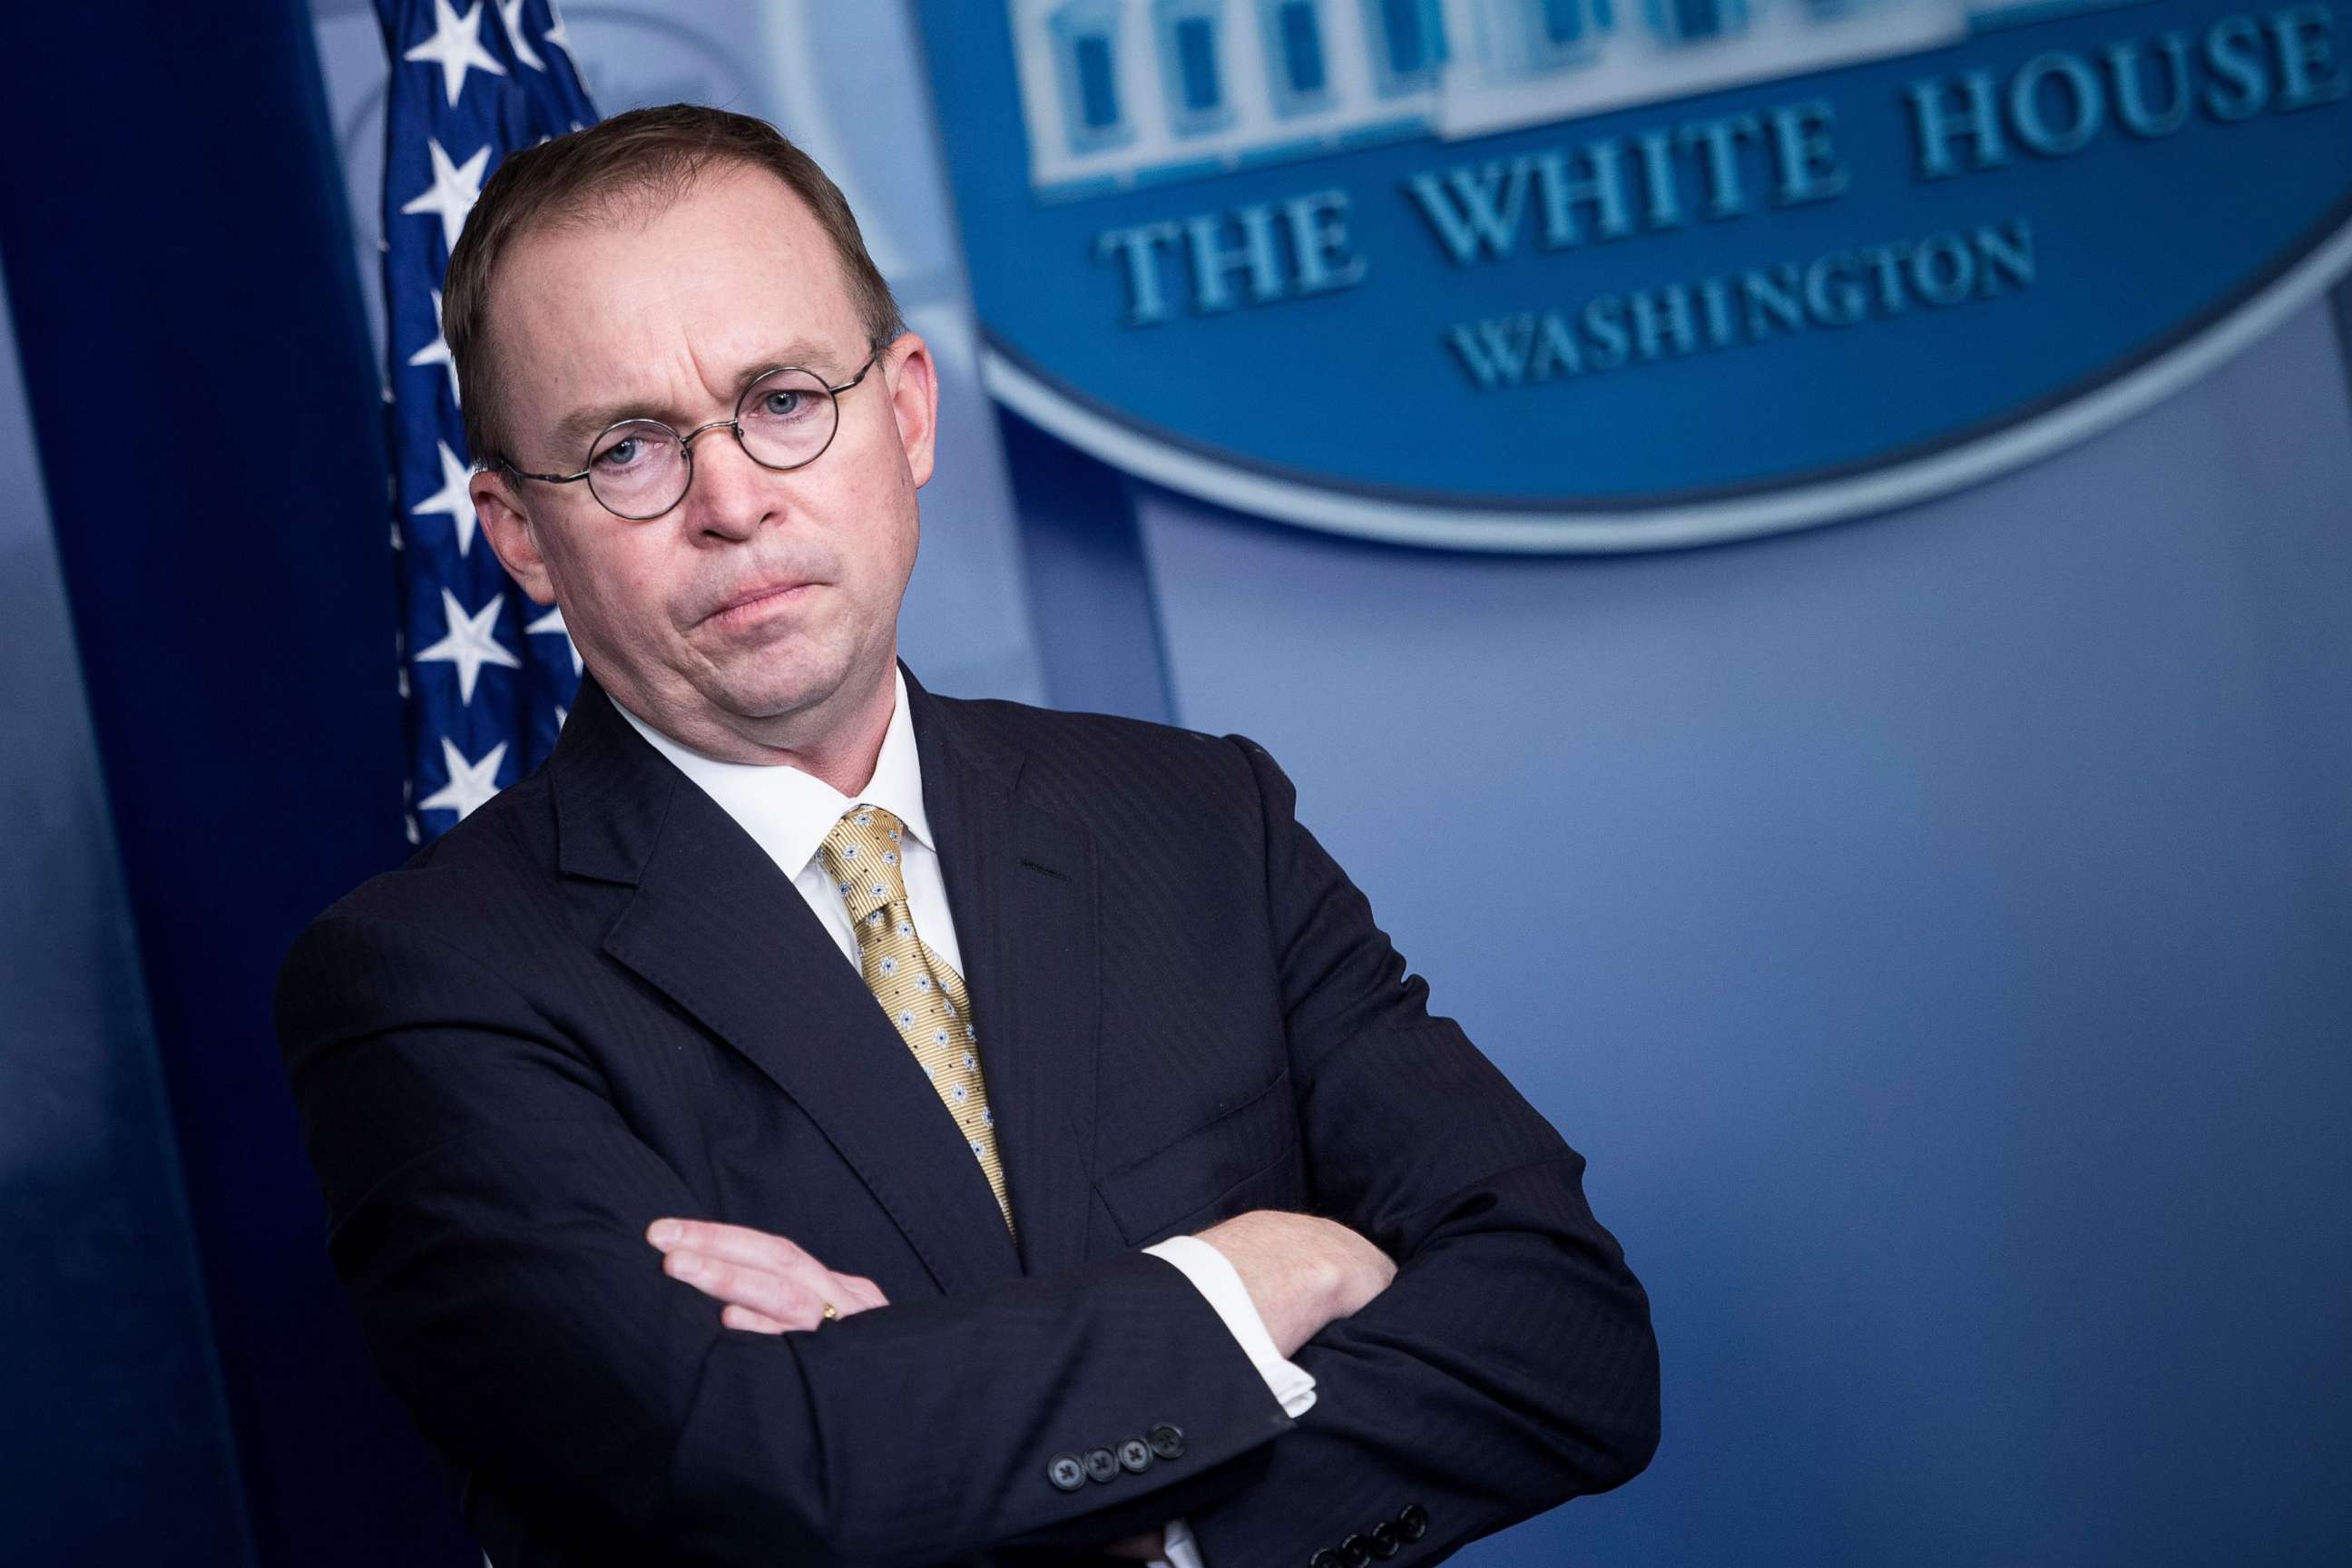 PHOTO: In this file photo taken on Jan. 20, 2018, Mick Mulvaney, director of the Office of Management and Budget, listens during a briefing at the James S. Brady Press Briefing Room of the White House in Washington, D.C.